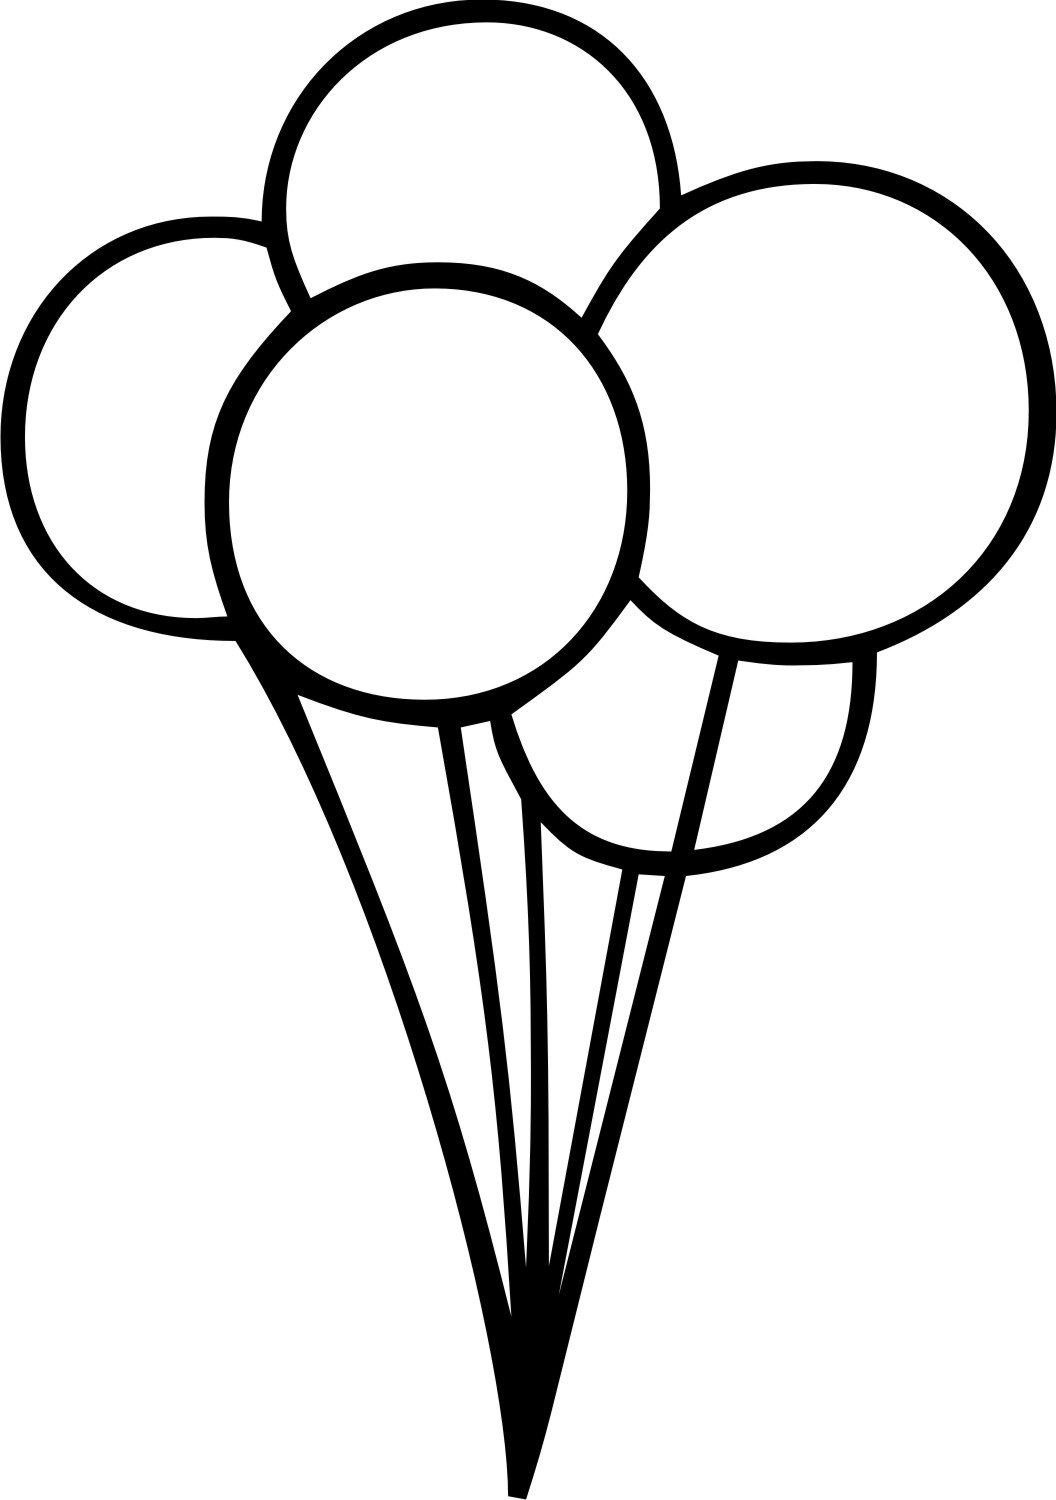 Balloon Outline - ClipArt Best - Cliparts.co